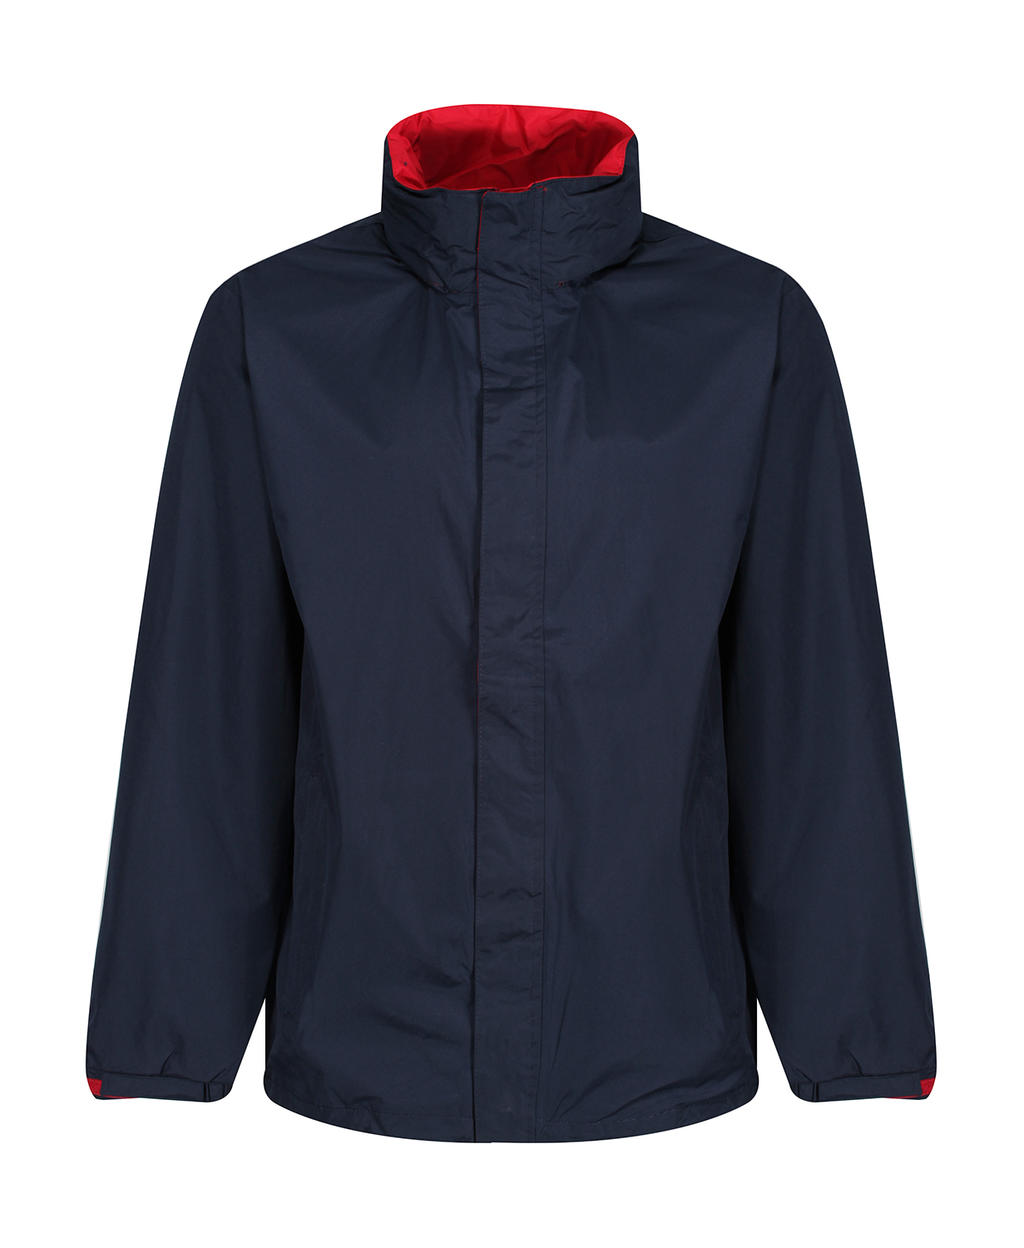  Ardmore Jacket in Farbe Navy/Classic Red